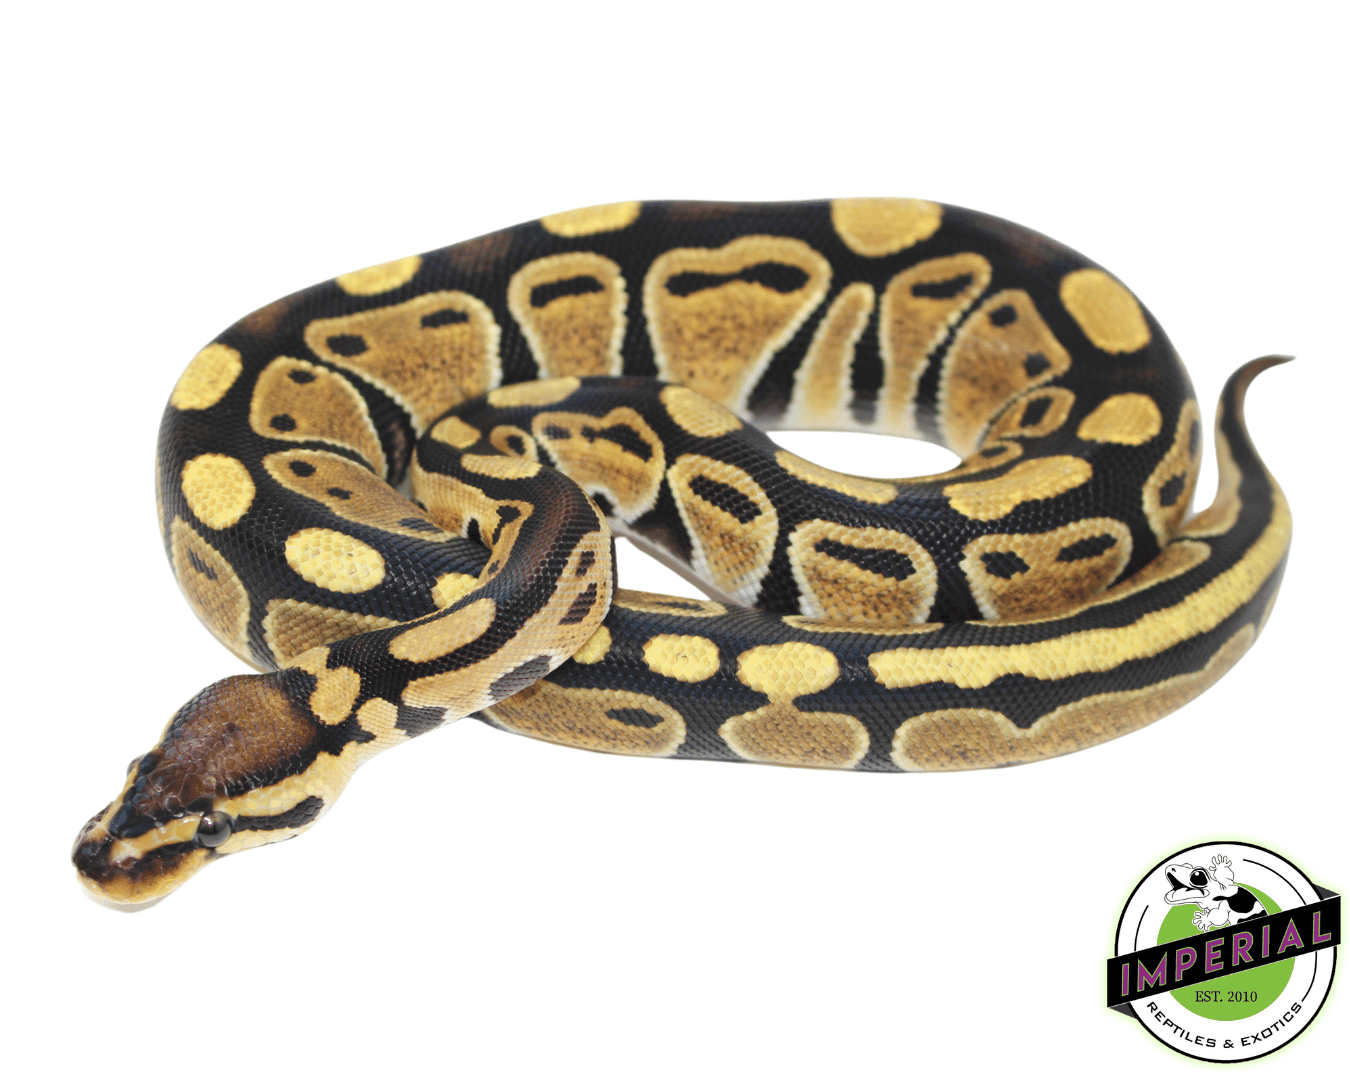 spark ball python for sale, buy reptiles online